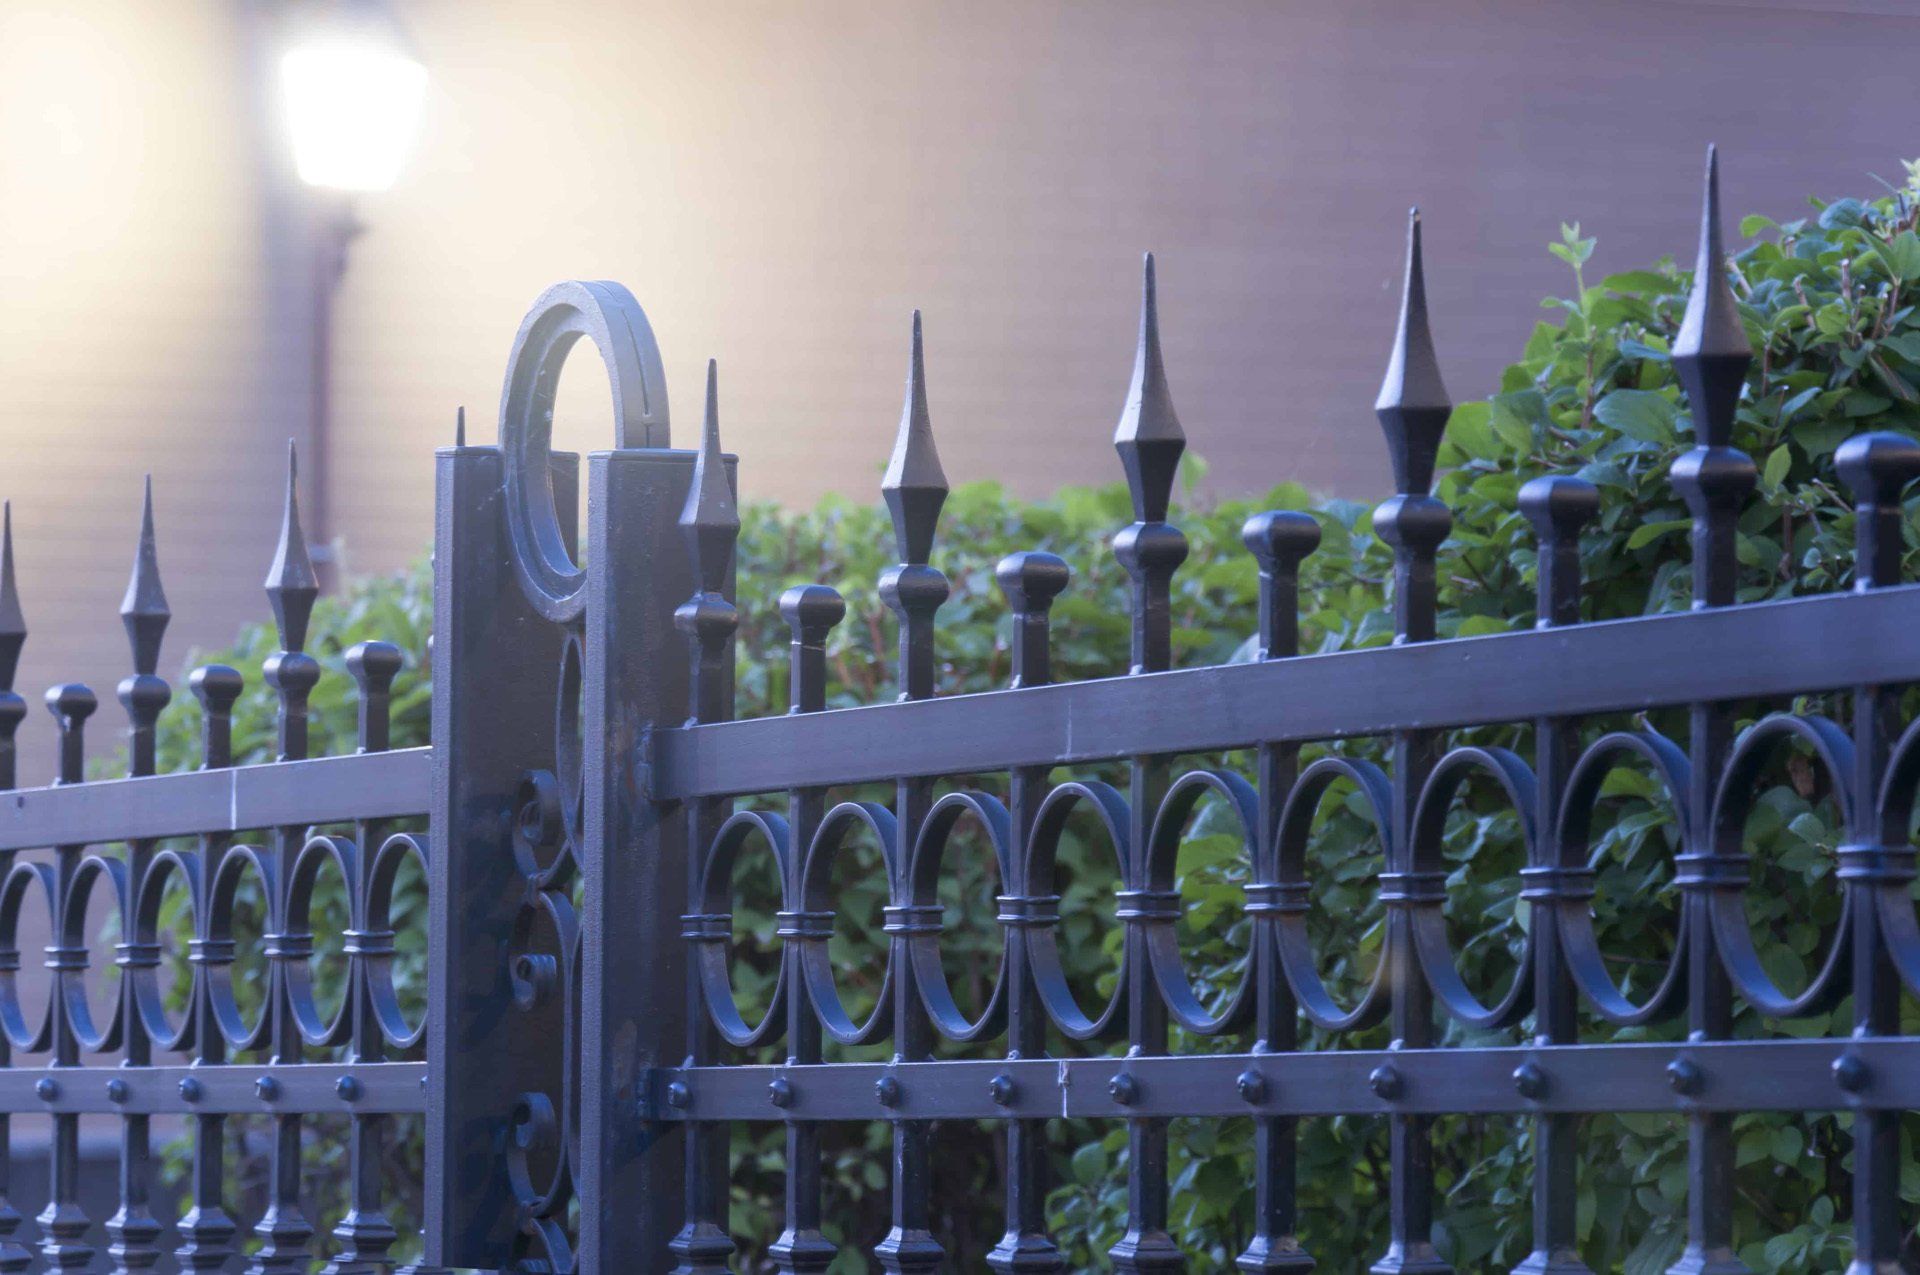 Secured wrought iron fence